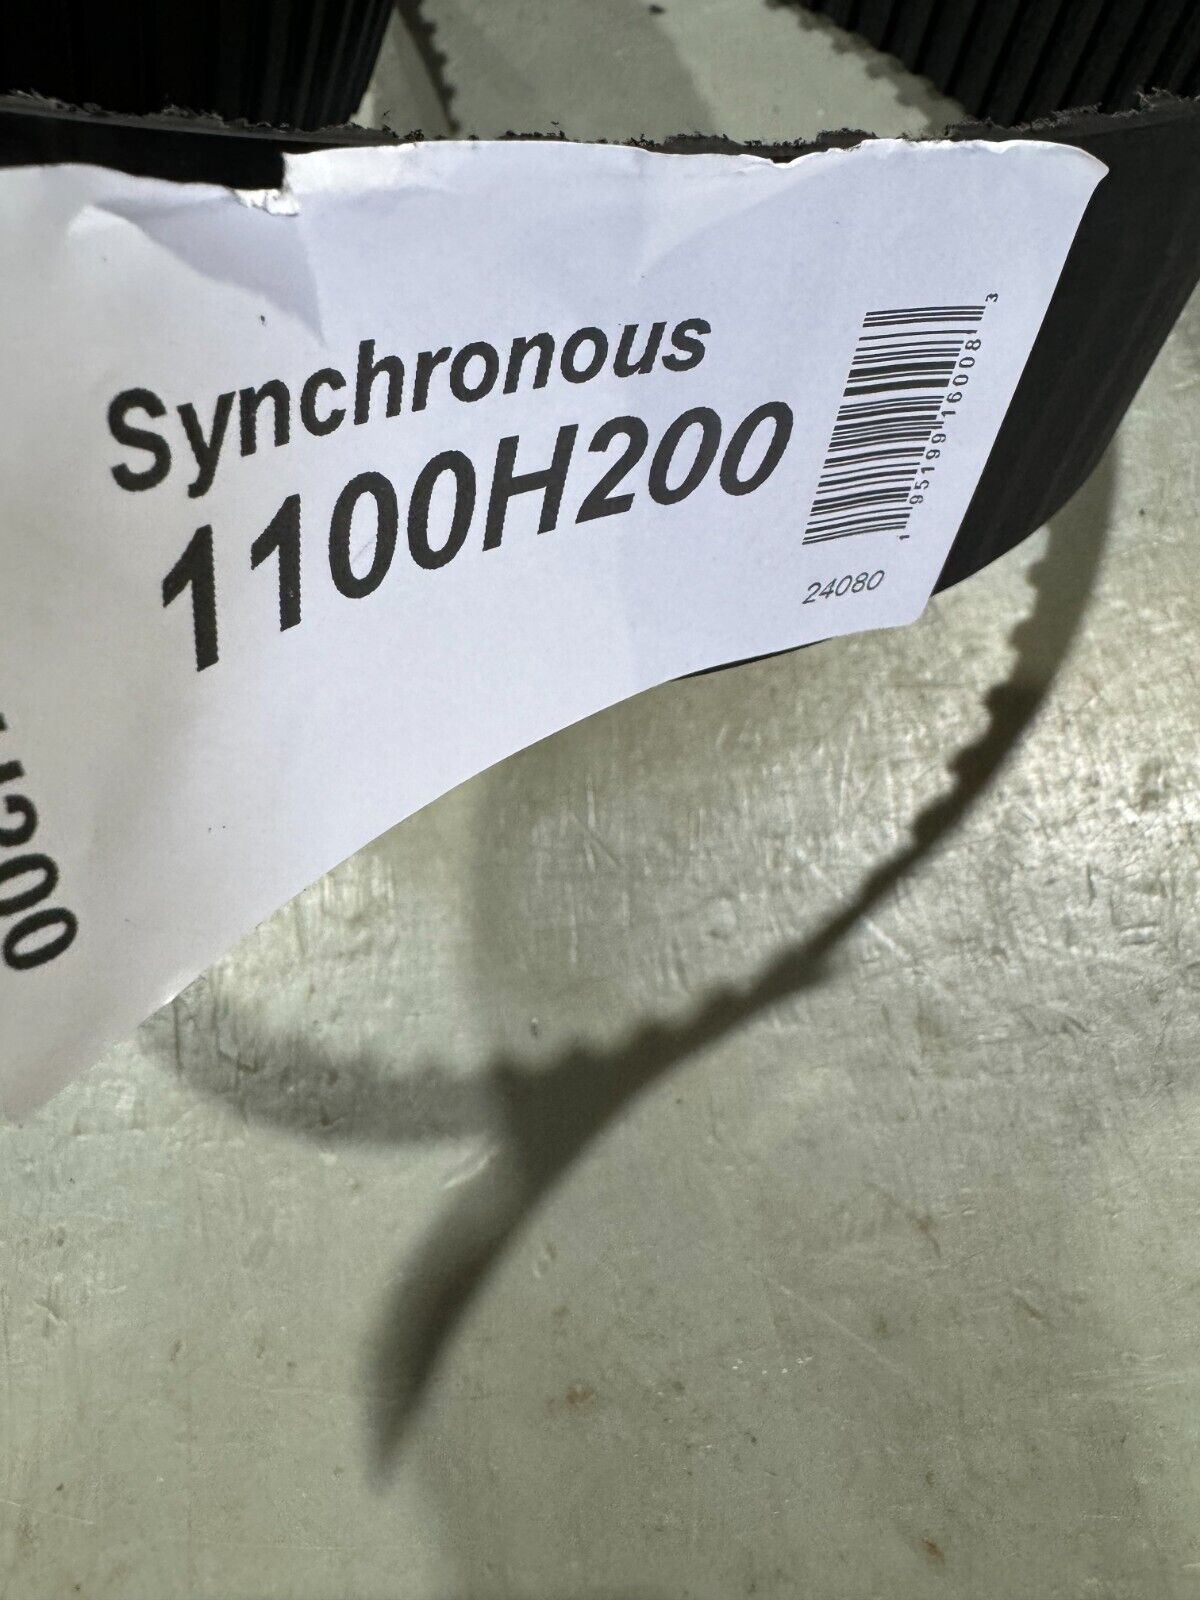 FACTORY NEW GOODYEAR SYNCHRONOUS TIMING BELT 1100H200